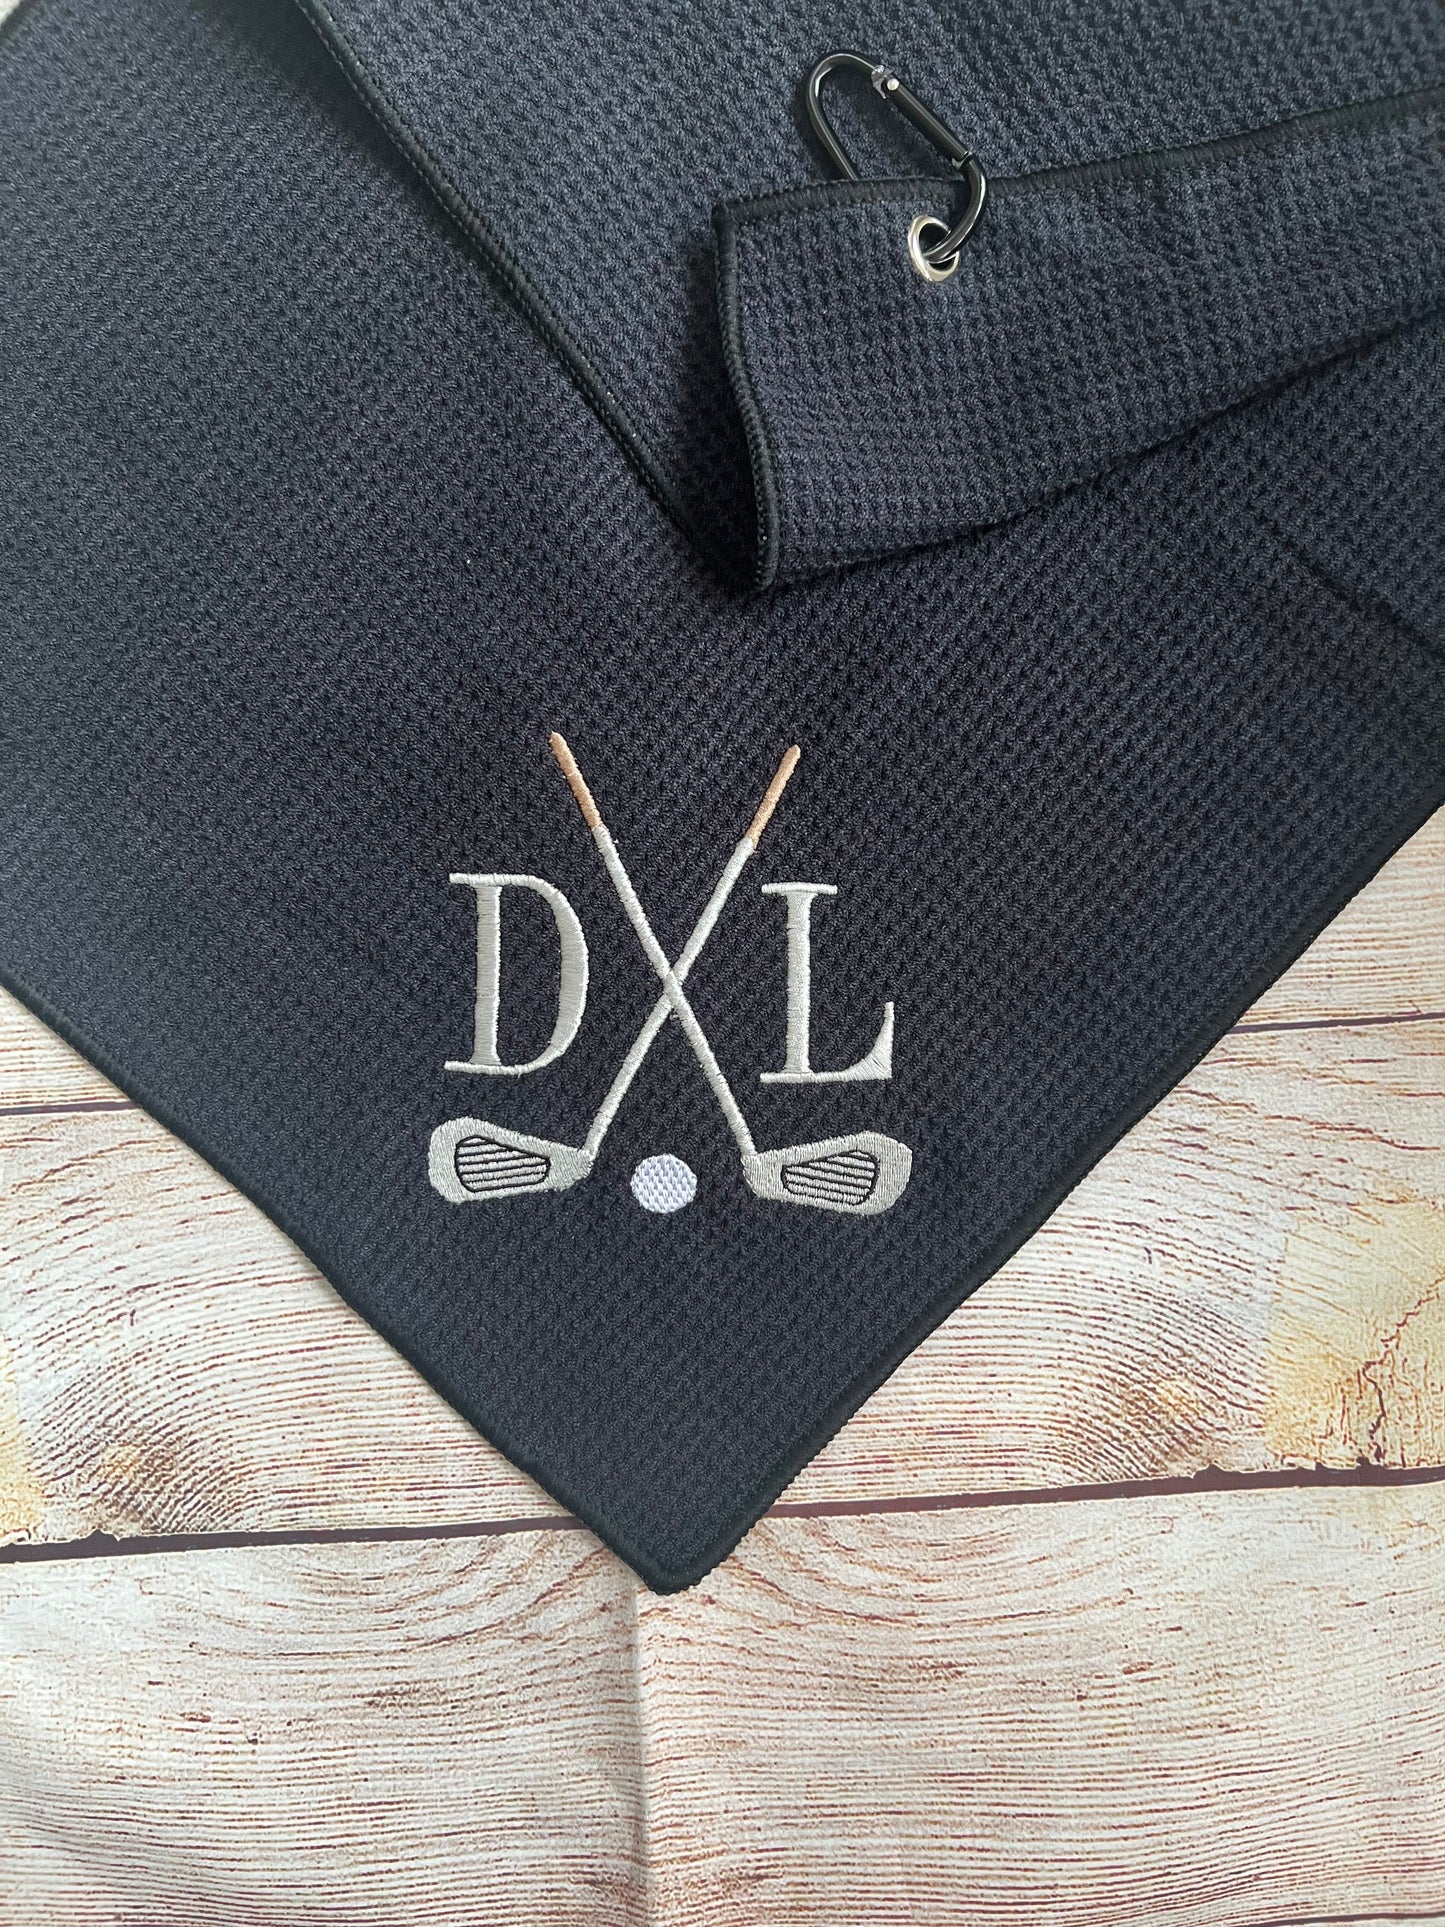 Personalized Golf Towel - Monogrammed Golf Towel-Golf Gift- Embroidered -2 Sizes